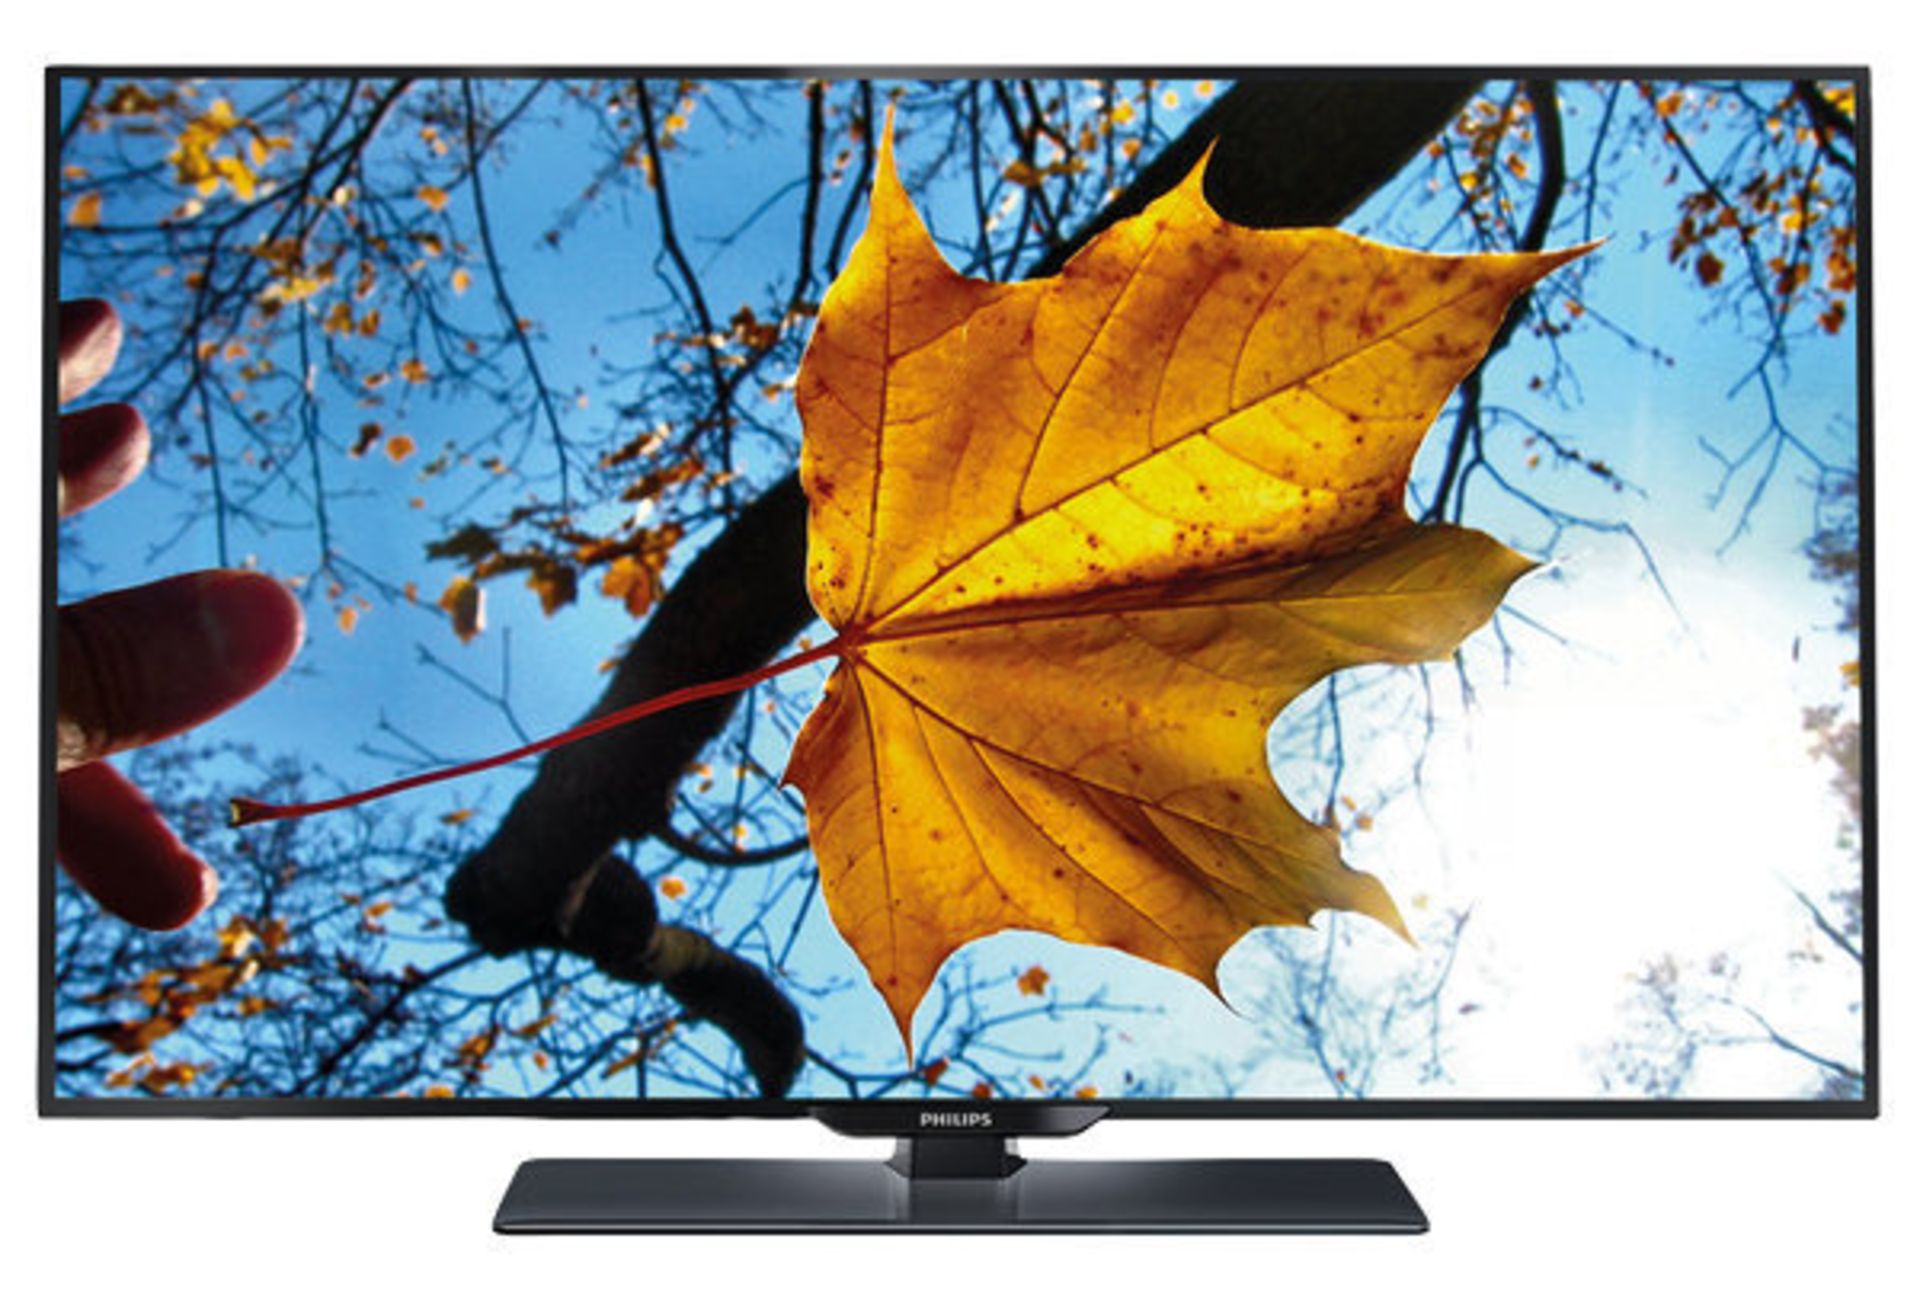 V Grade A 50PFT4509 Phillips 50" Widescreen Full HD 1080p LED LCD Smart TV With Freeview HD, WiFi